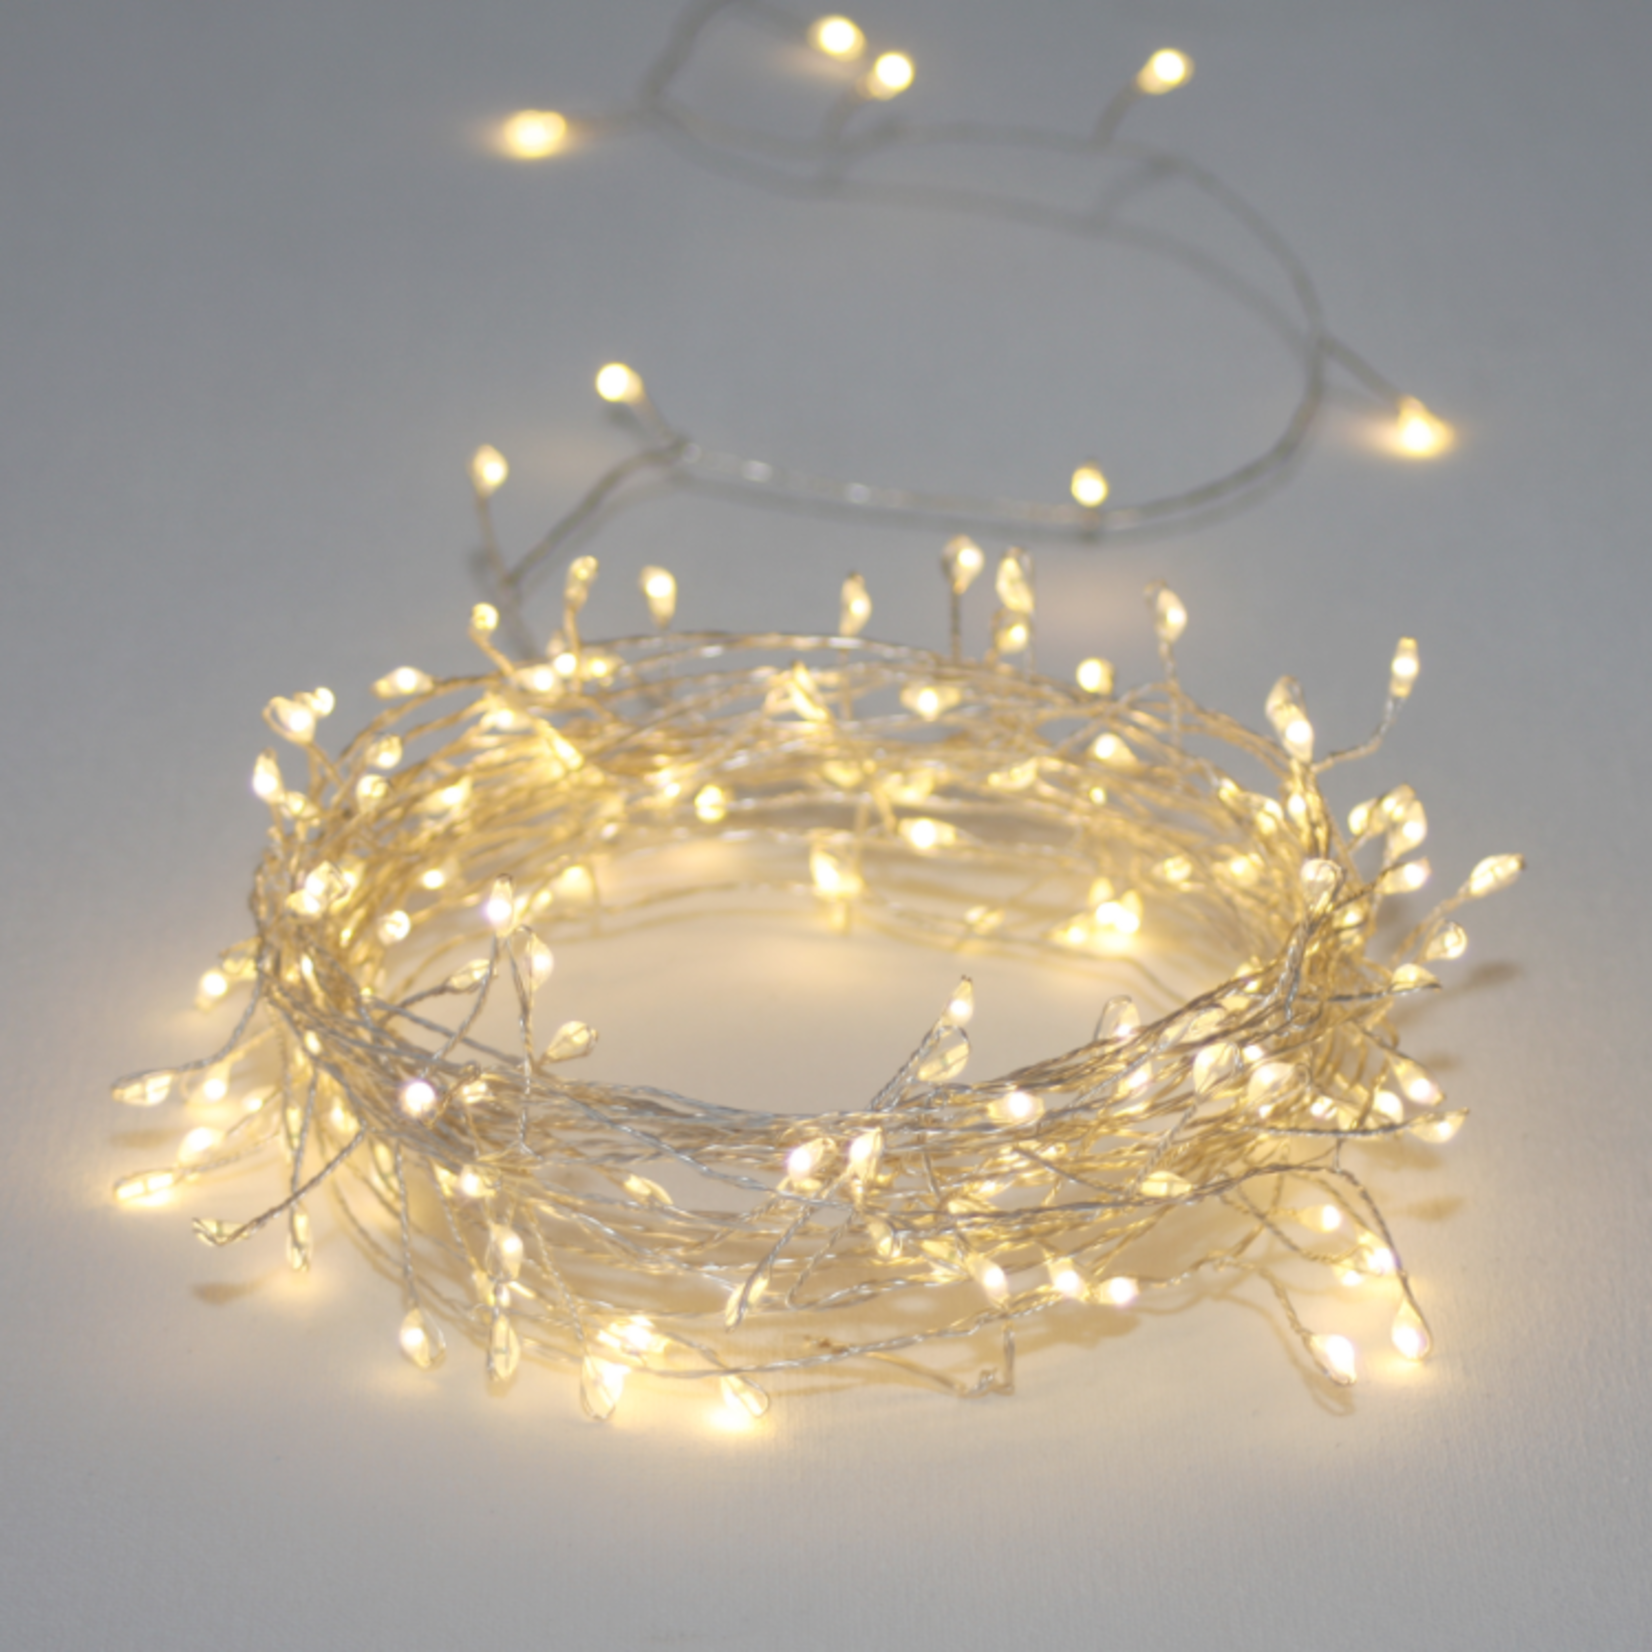 Light Style London Silver Cluster Fairy Lights 15m Illuminated Length UK Mains Plug  Indoor or Outdoor Mains